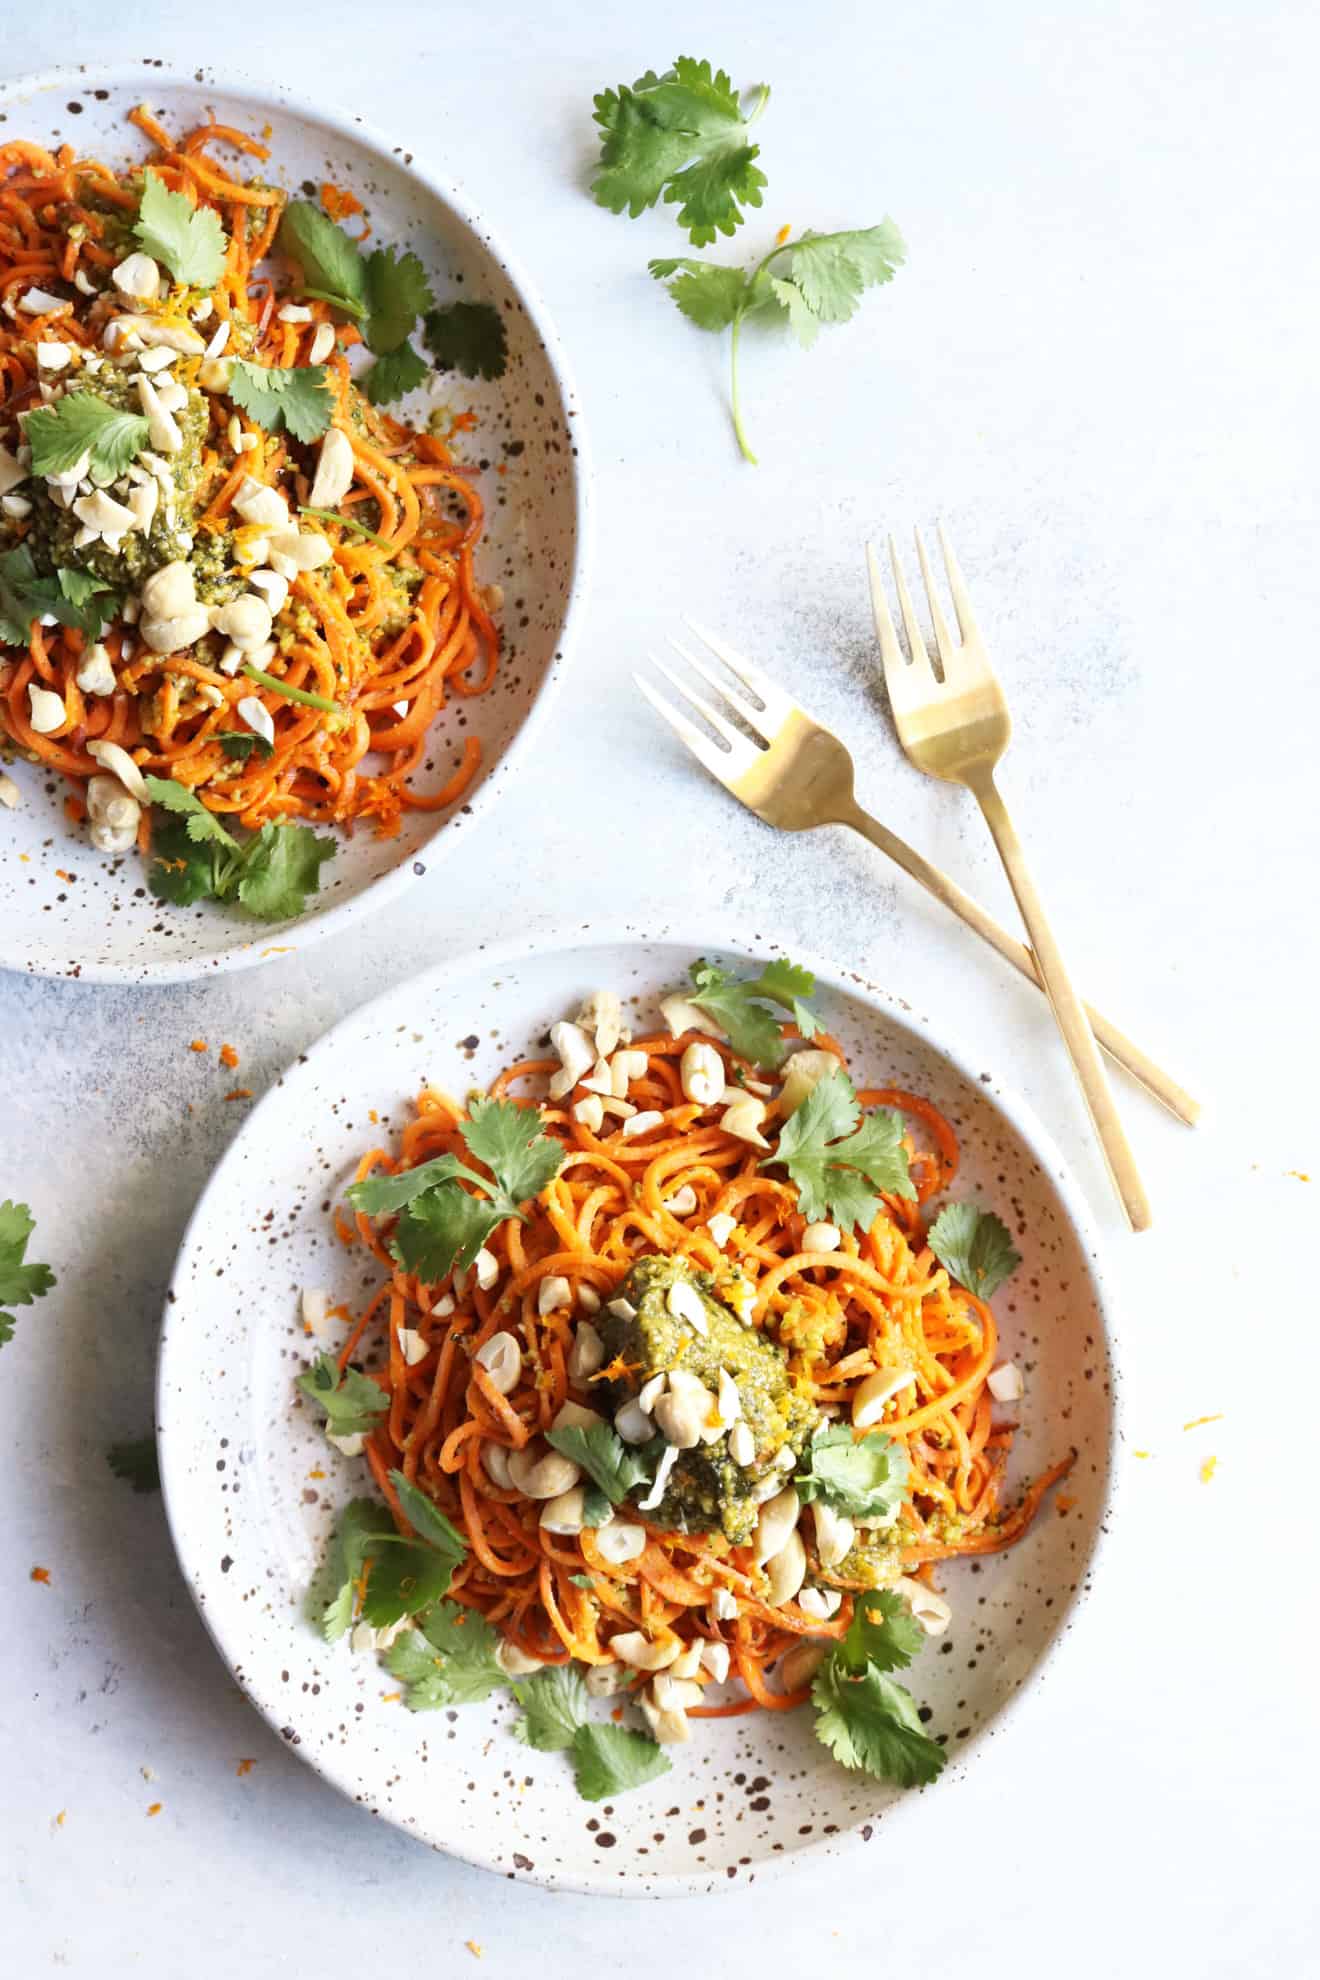 This is an overhead image of a speckled bowl with sweet potato noodles, pesto, cilantro, and cashews. The bowl sits on a white surface and another bowl to the top left of the image. Gold forks lay on the surface to the top of the bowl.